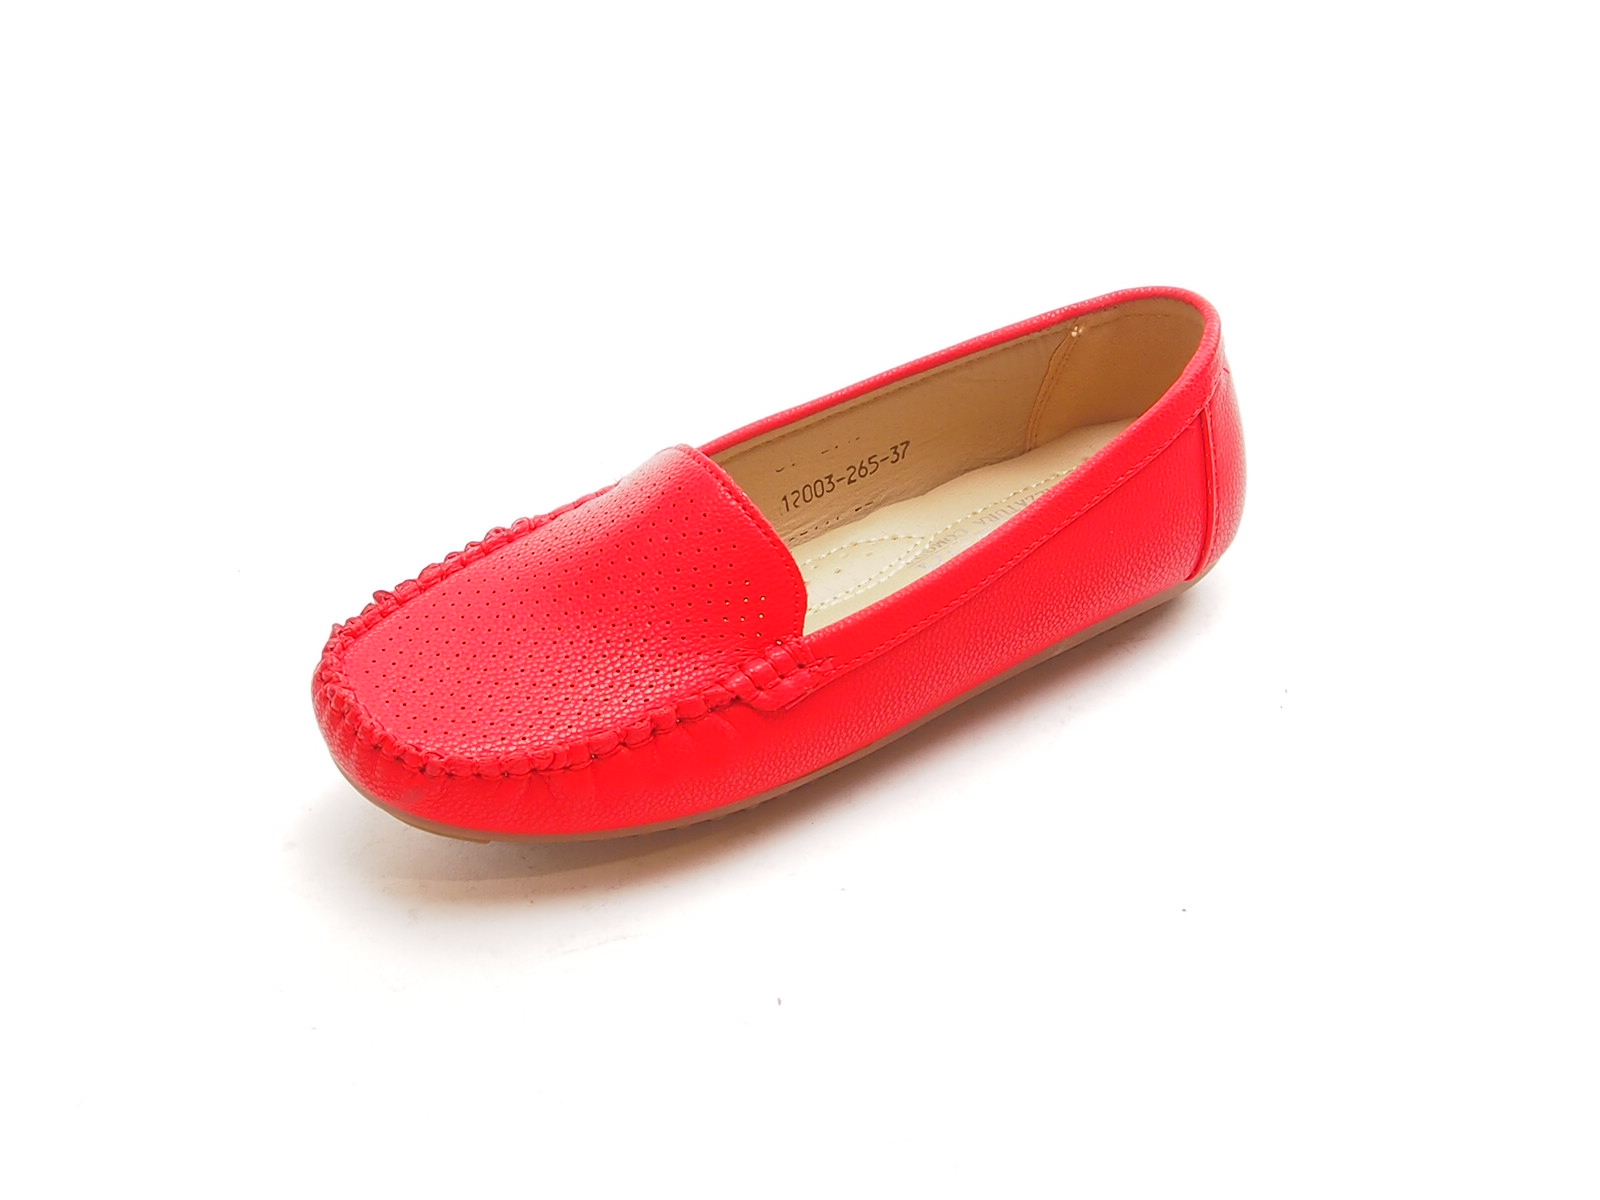 12003-265 ROSSO ( RED ) 36-41 